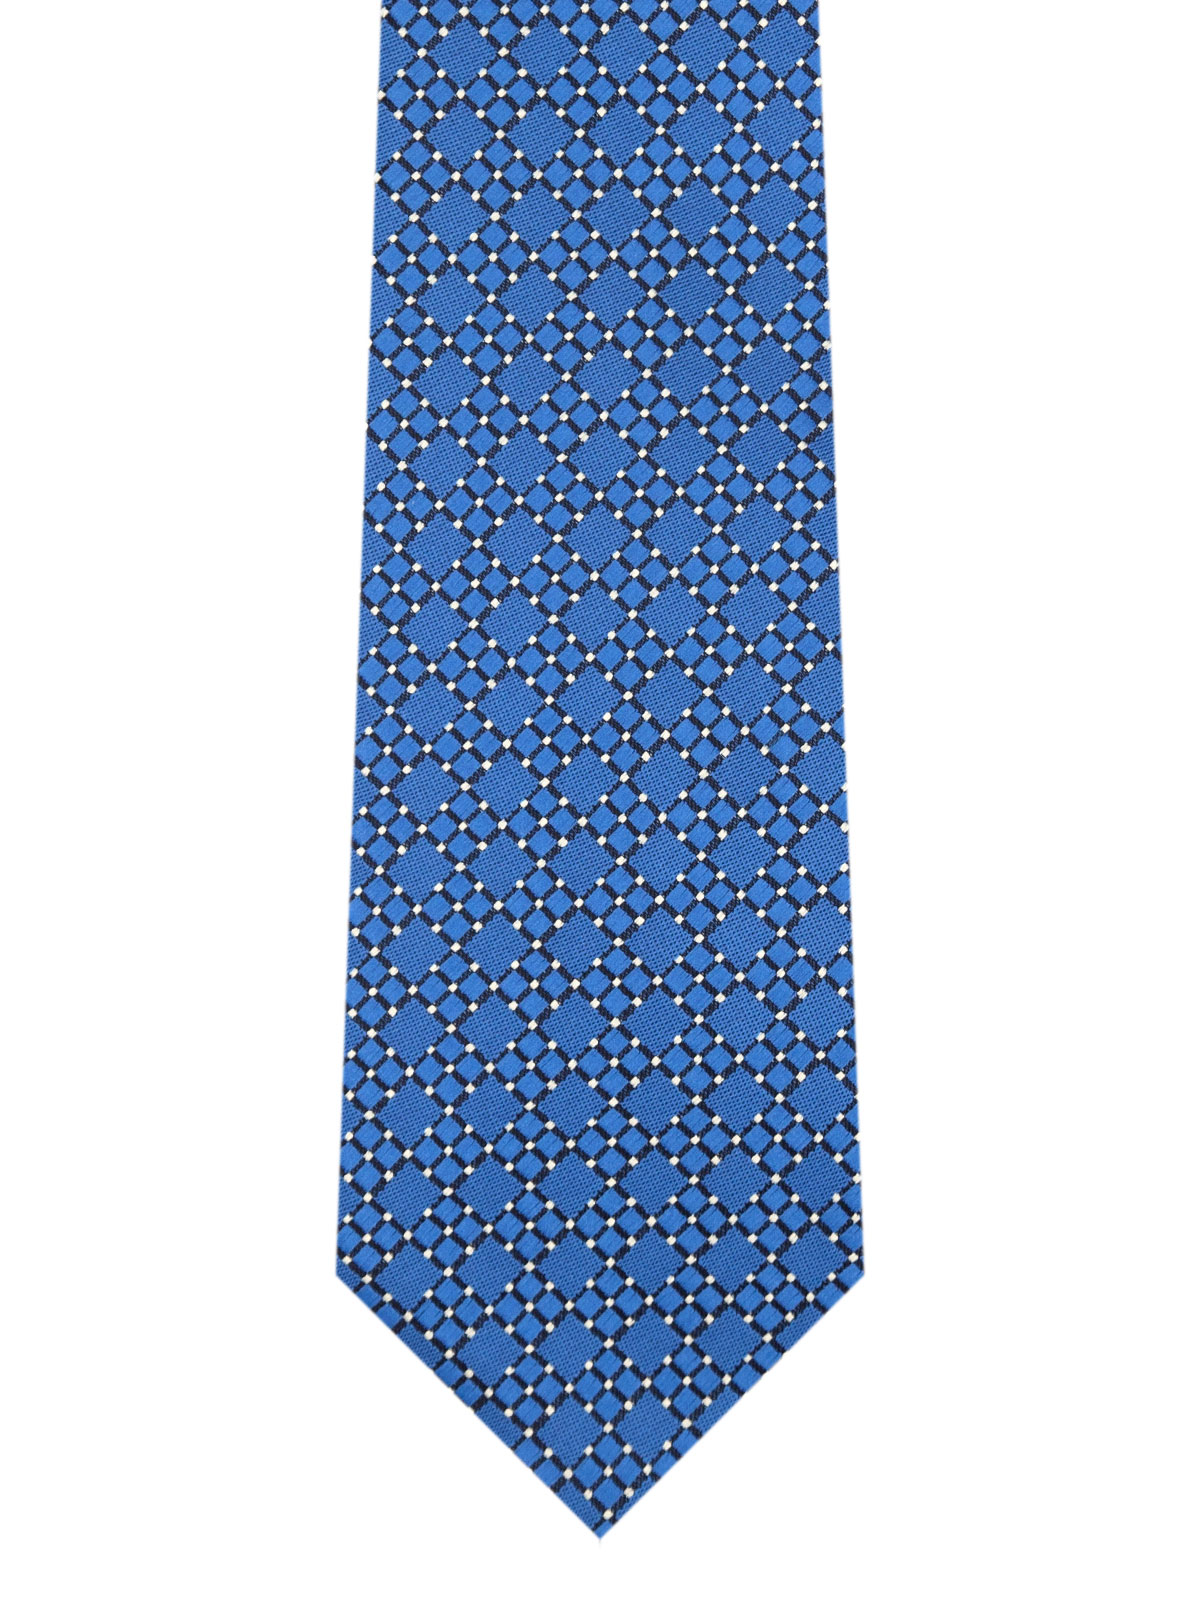 Necktie in petrol with beige shapes - 10197 - € 14.06 img2